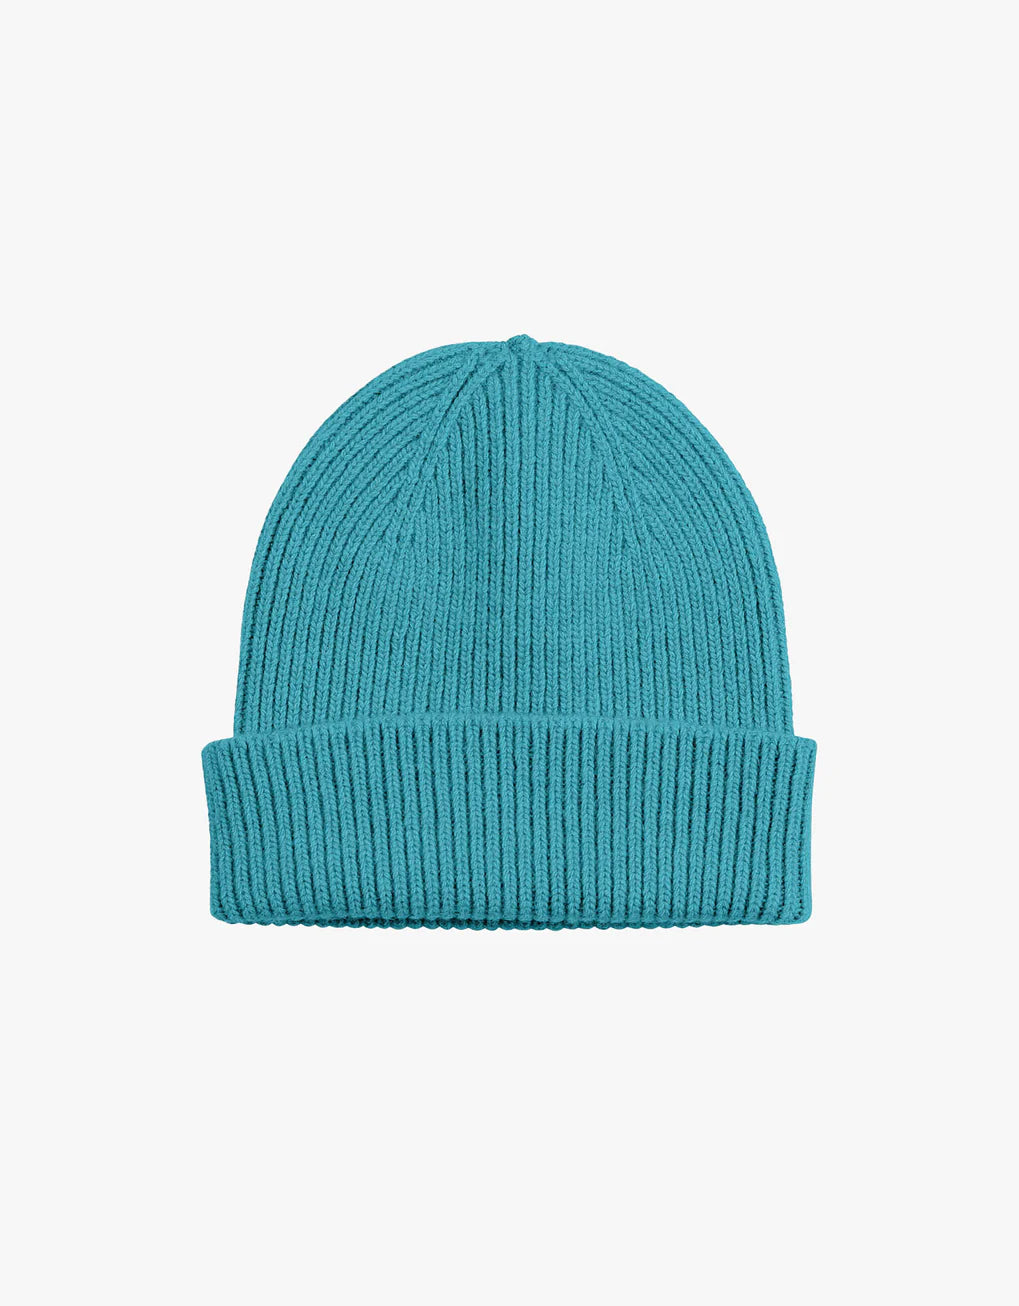 A Colorful Standard Merino Wool Beanie on a white background.